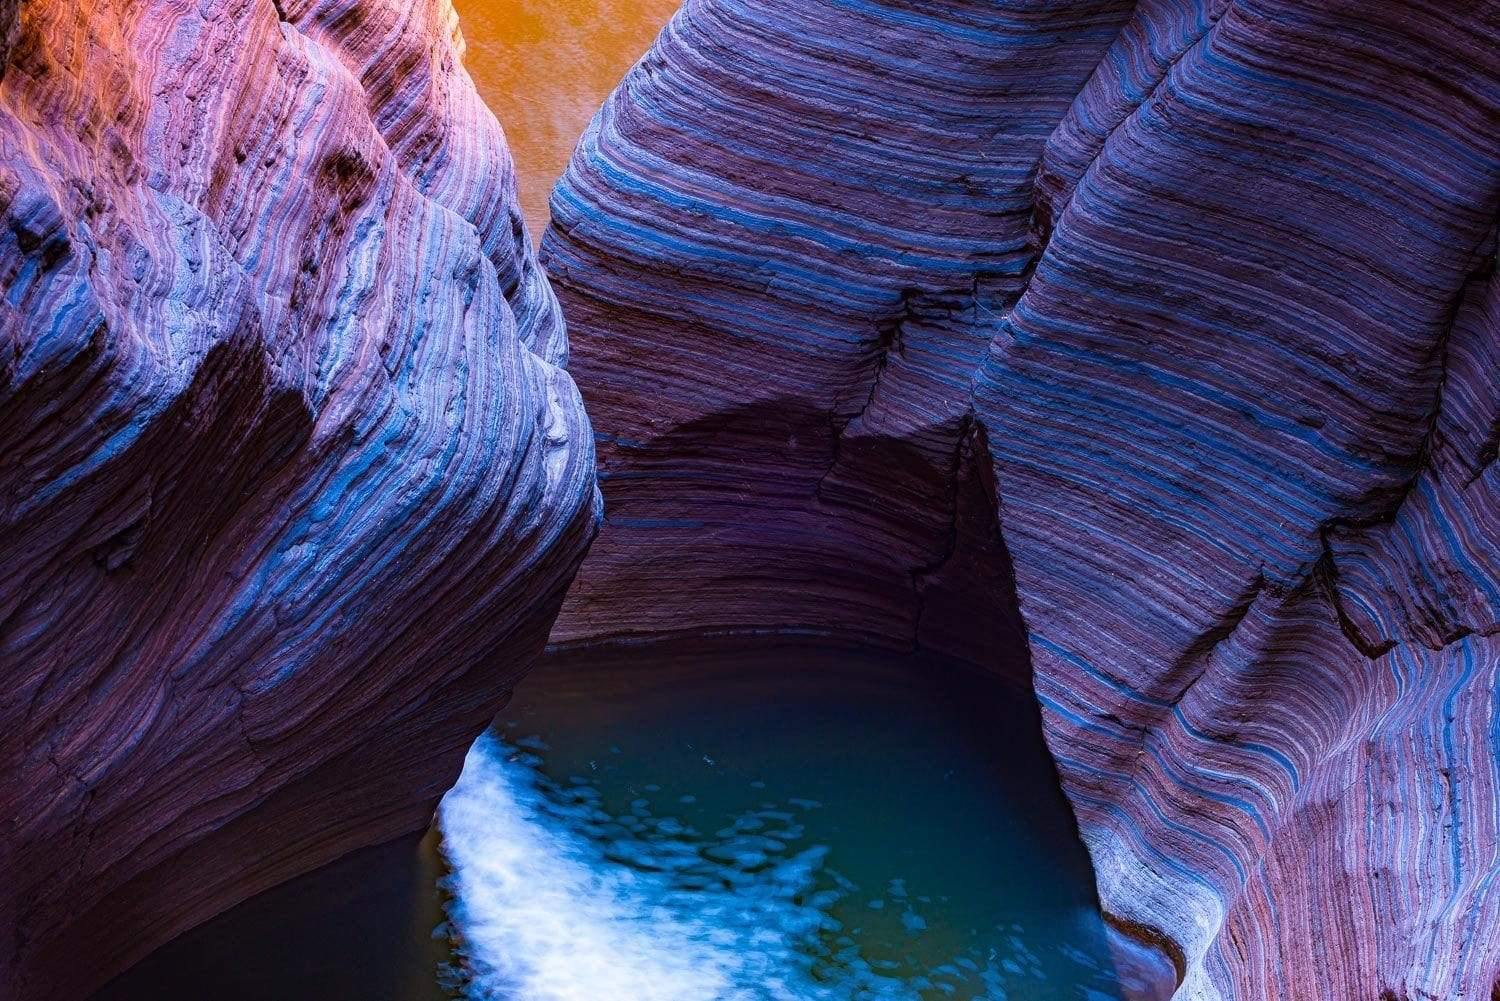 A colorful thin lining texture on the giant mountain stones standing tall with the flow of water below, Banded Gorge - Karijini, The Pilbara